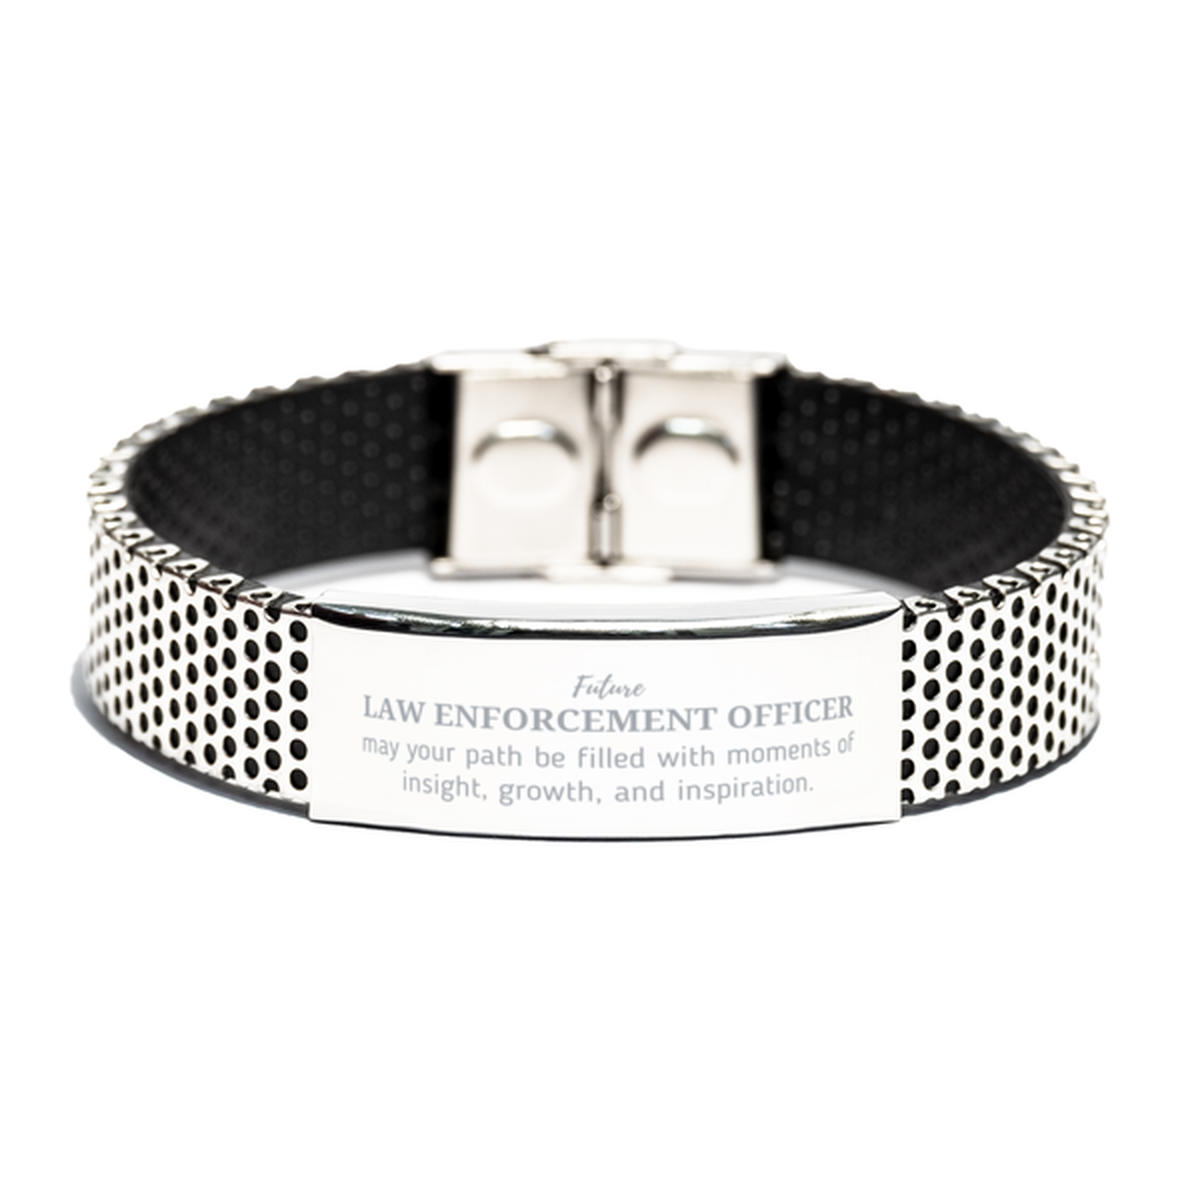 Future Law Enforcement Officer Gifts, May your path be filled with moments of insight, Graduation Gifts for New Law Enforcement Officer, Christmas Unique Stainless Steel Bracelet For Men, Women, Friends